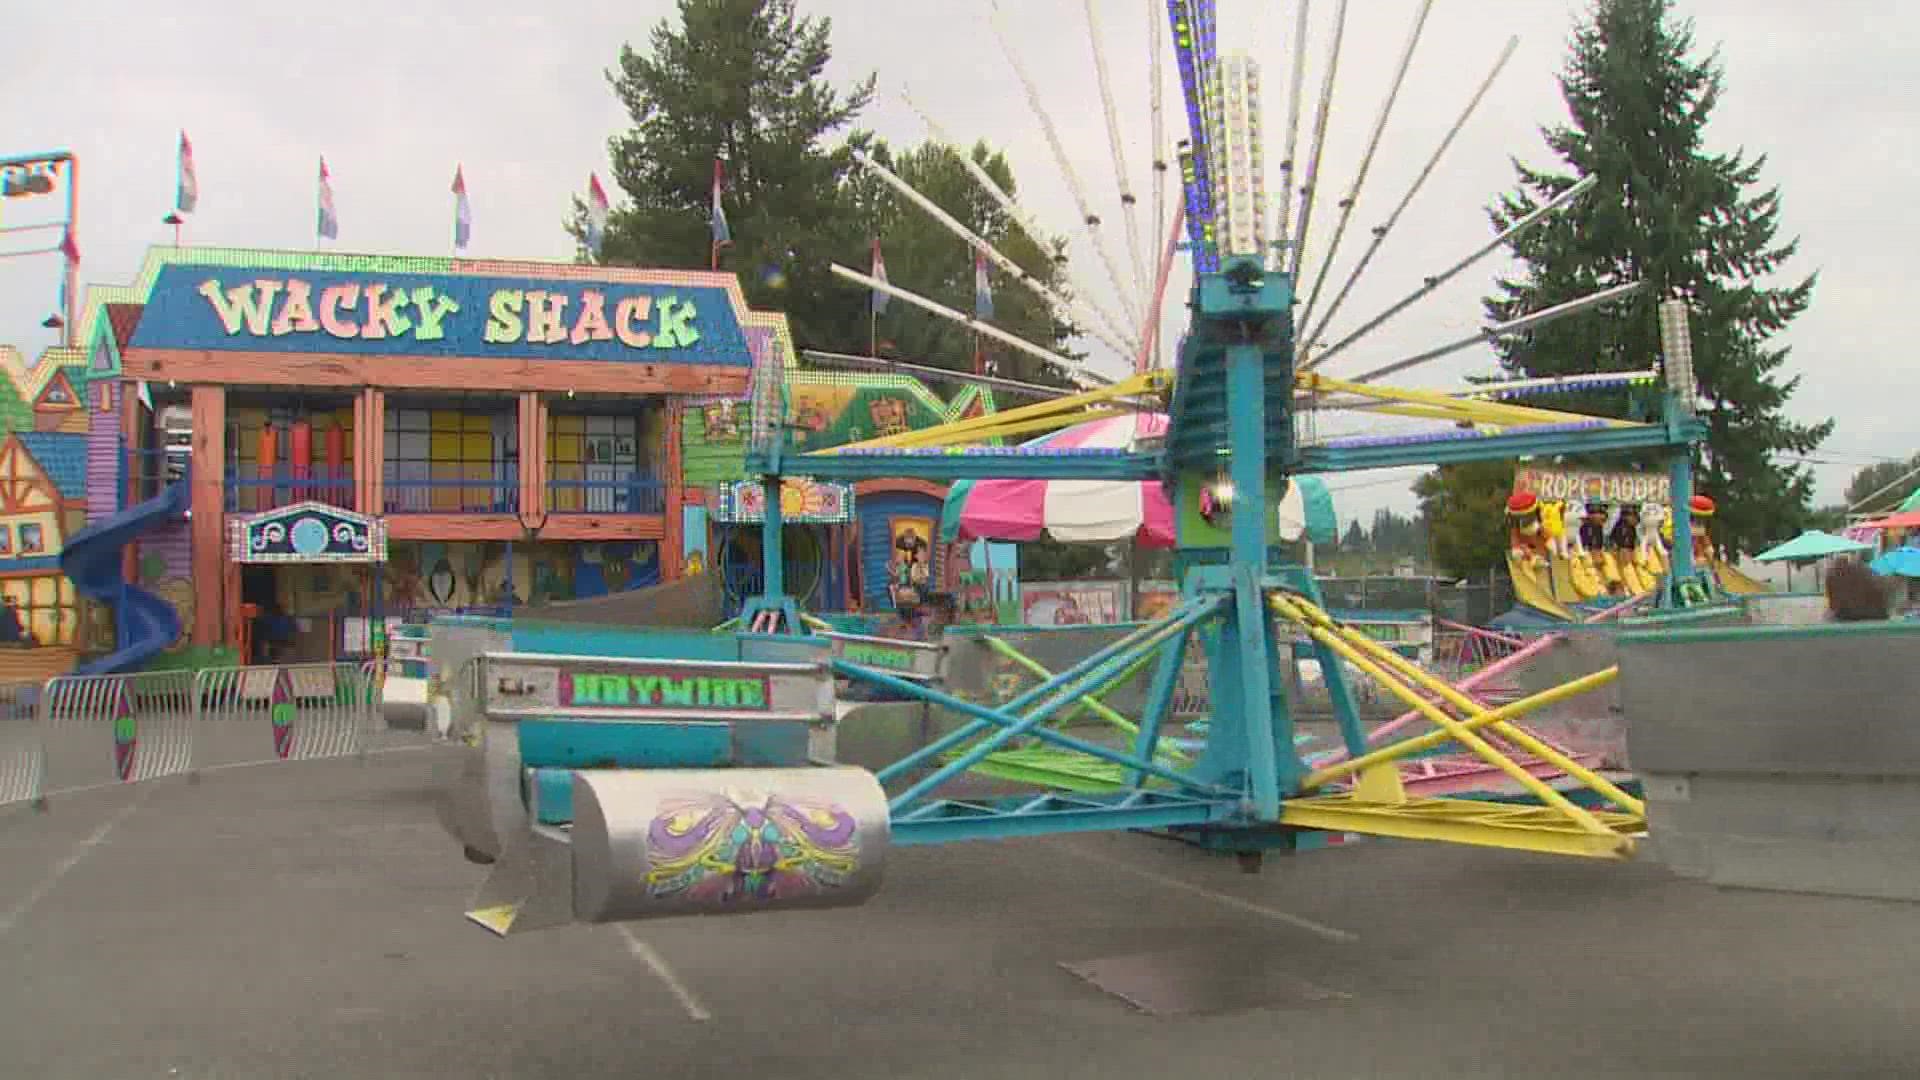 The 11-day fair was canceled in 2020 because of the pandemic.